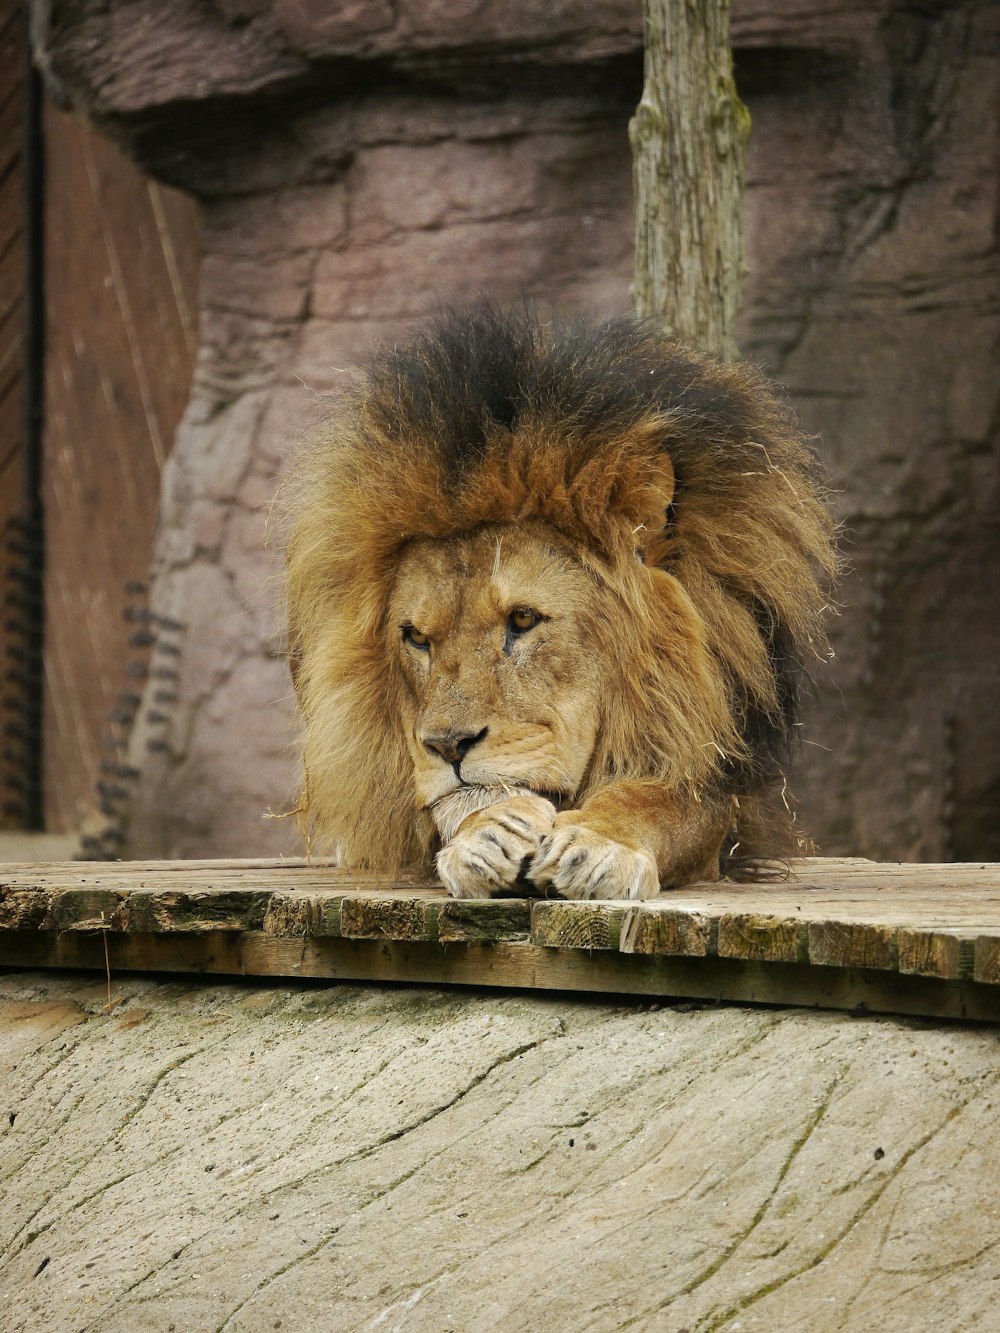 a lion sitting on a ledge in a zoo